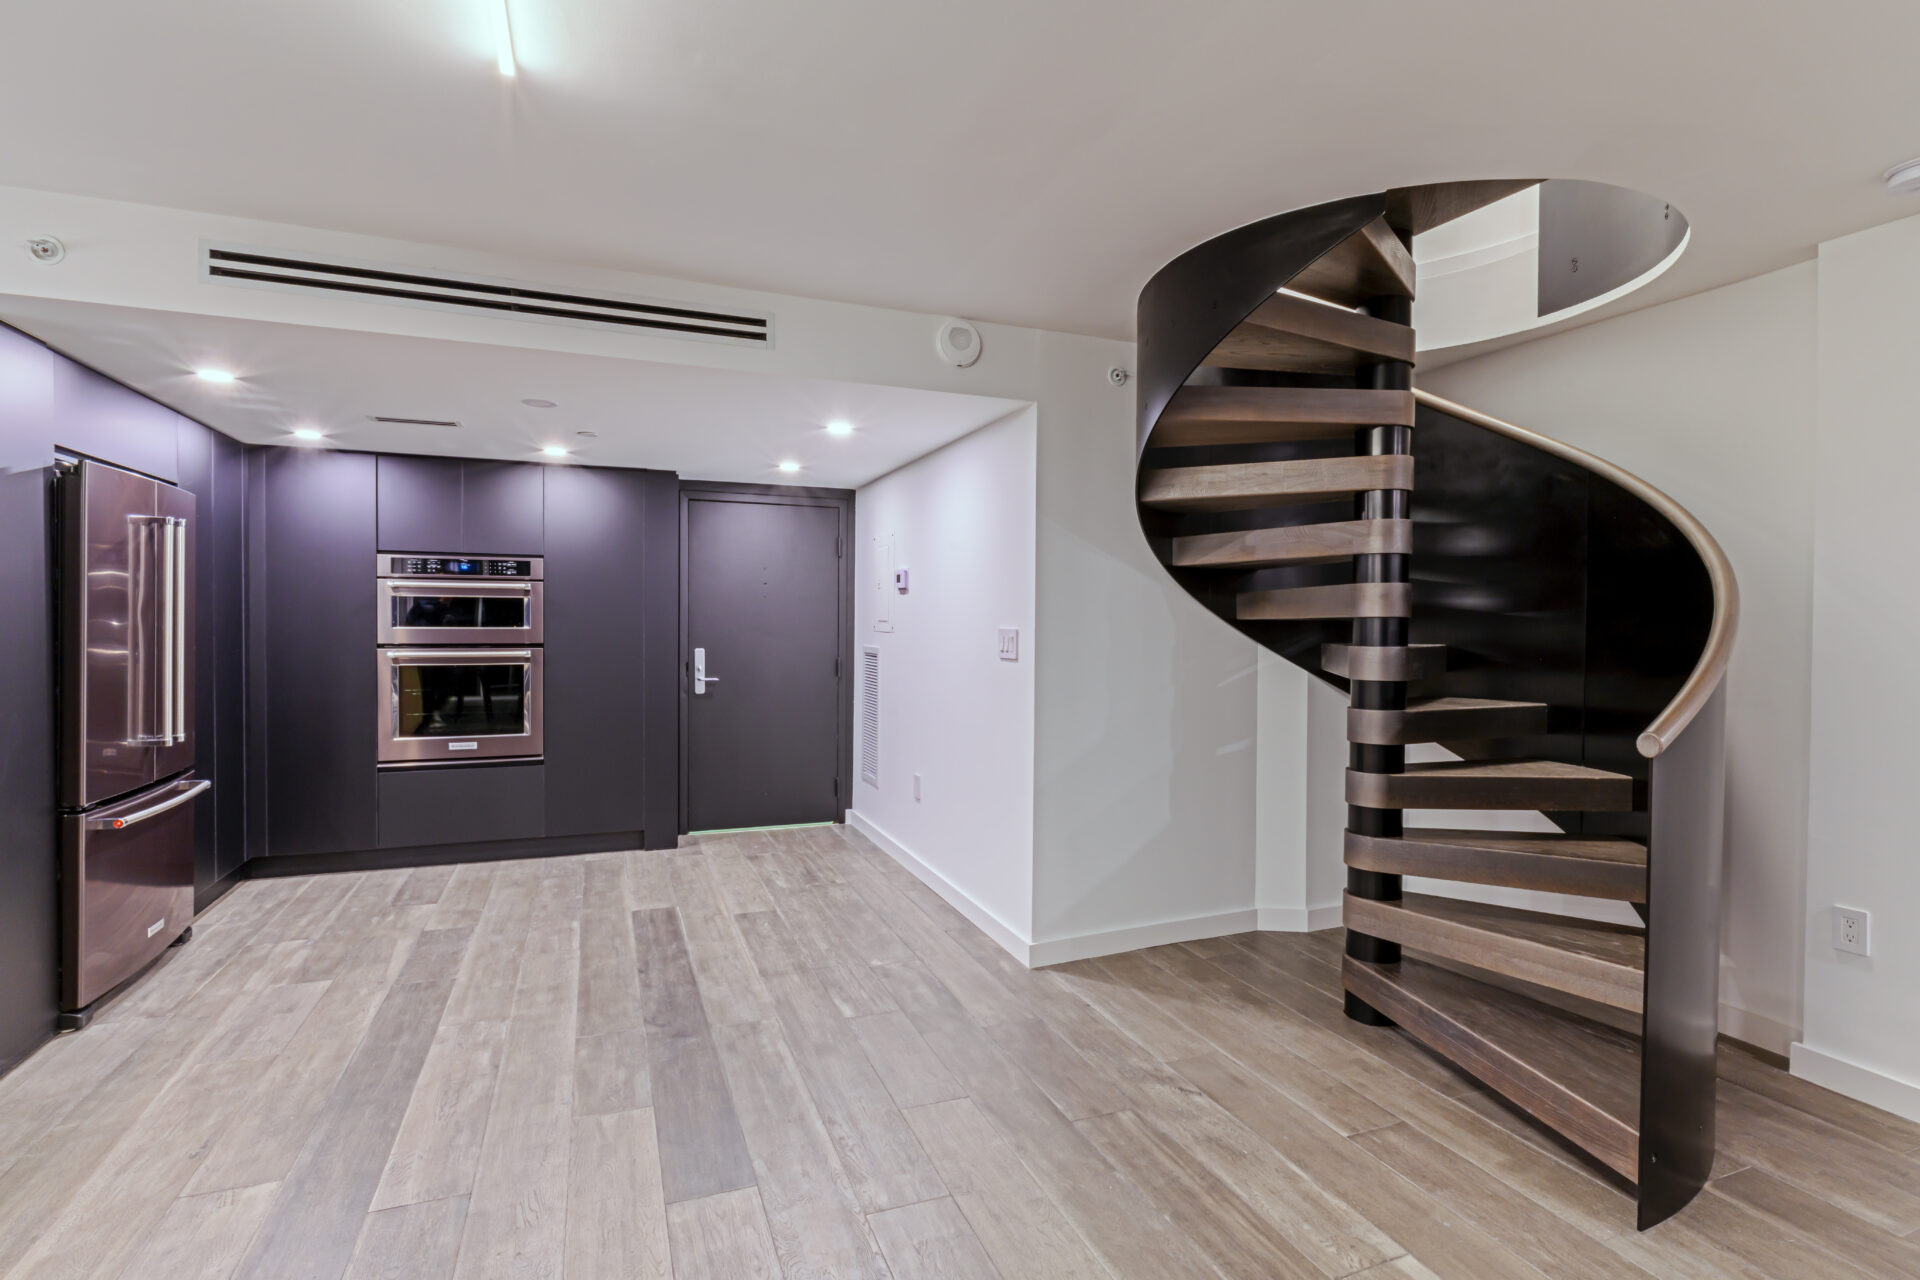 A kitchen with a spiral wooden staircase